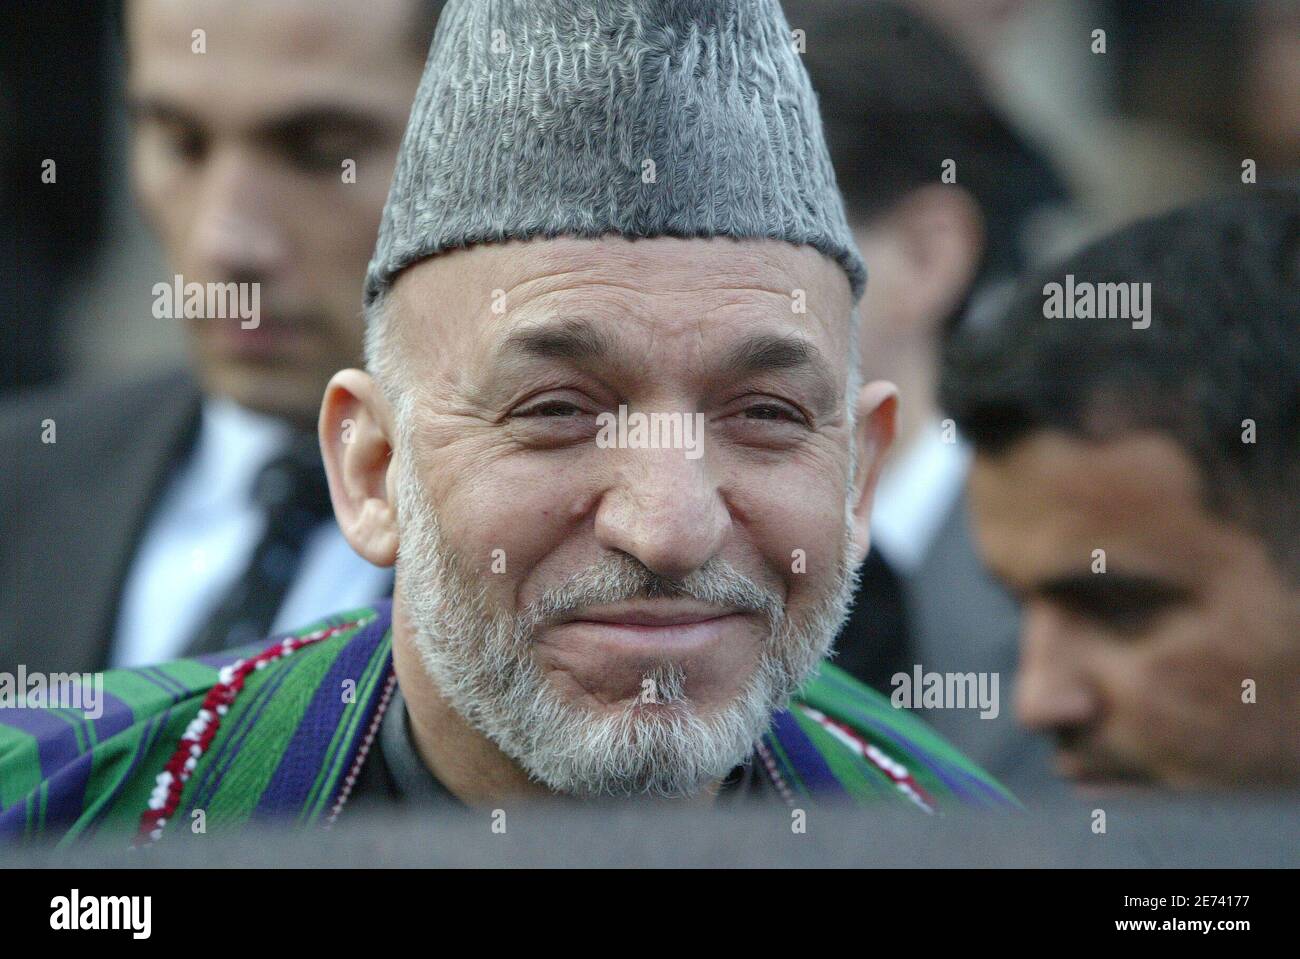 Afghan President Hamid Karzai pictured as he visits the exhibition 'Afghanistan Treasures' at the Guimet Museum in Paris, France, Monday, March 19, 2007. Photo by Bernard Bisson/ABACAPRESS.COM Stock Photo